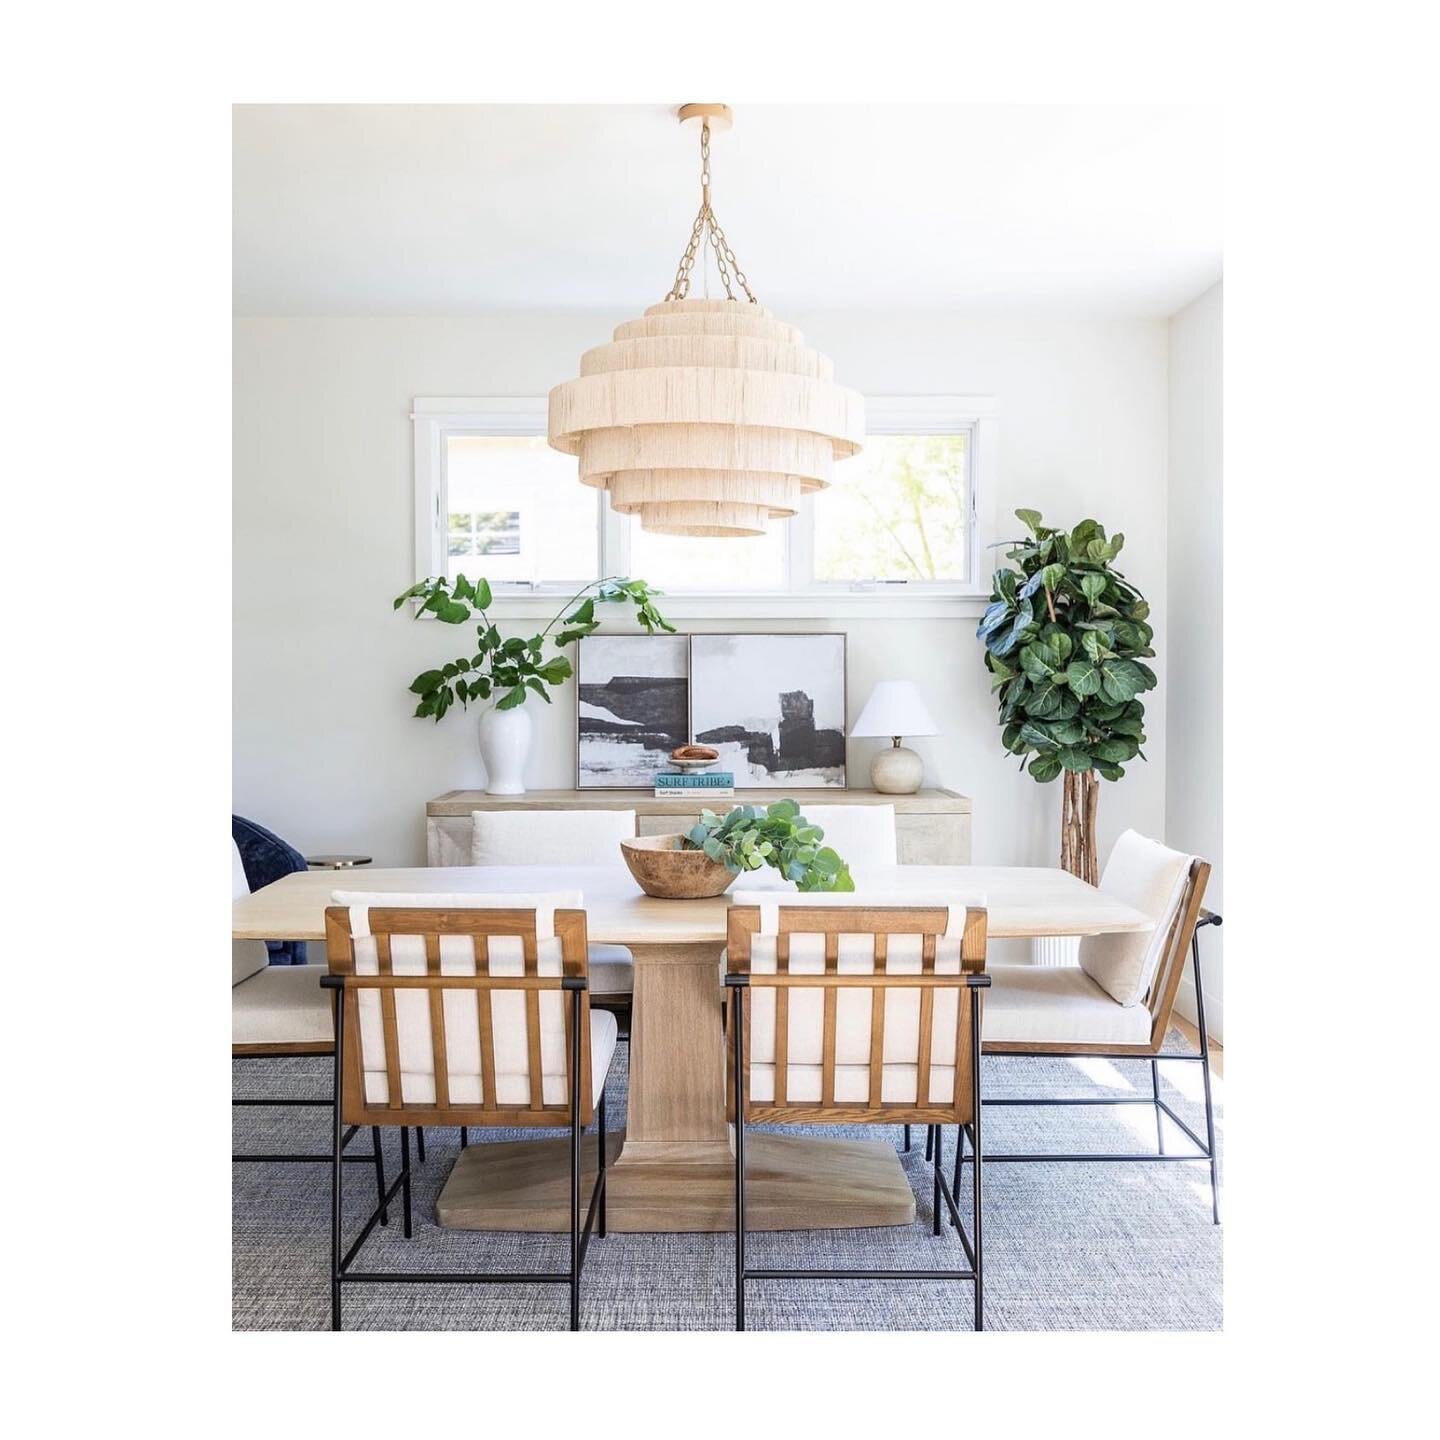 SSDC spotlight on @noirfurniture 🤍
We're loving how this dinner table effortlessly elevates the room's charm, making it unique!

Designed by: @collinsandco.interiors
📸 : @thebrandedbosslady

#interiordesign #table #dinnertable #leavingroom #eleganc